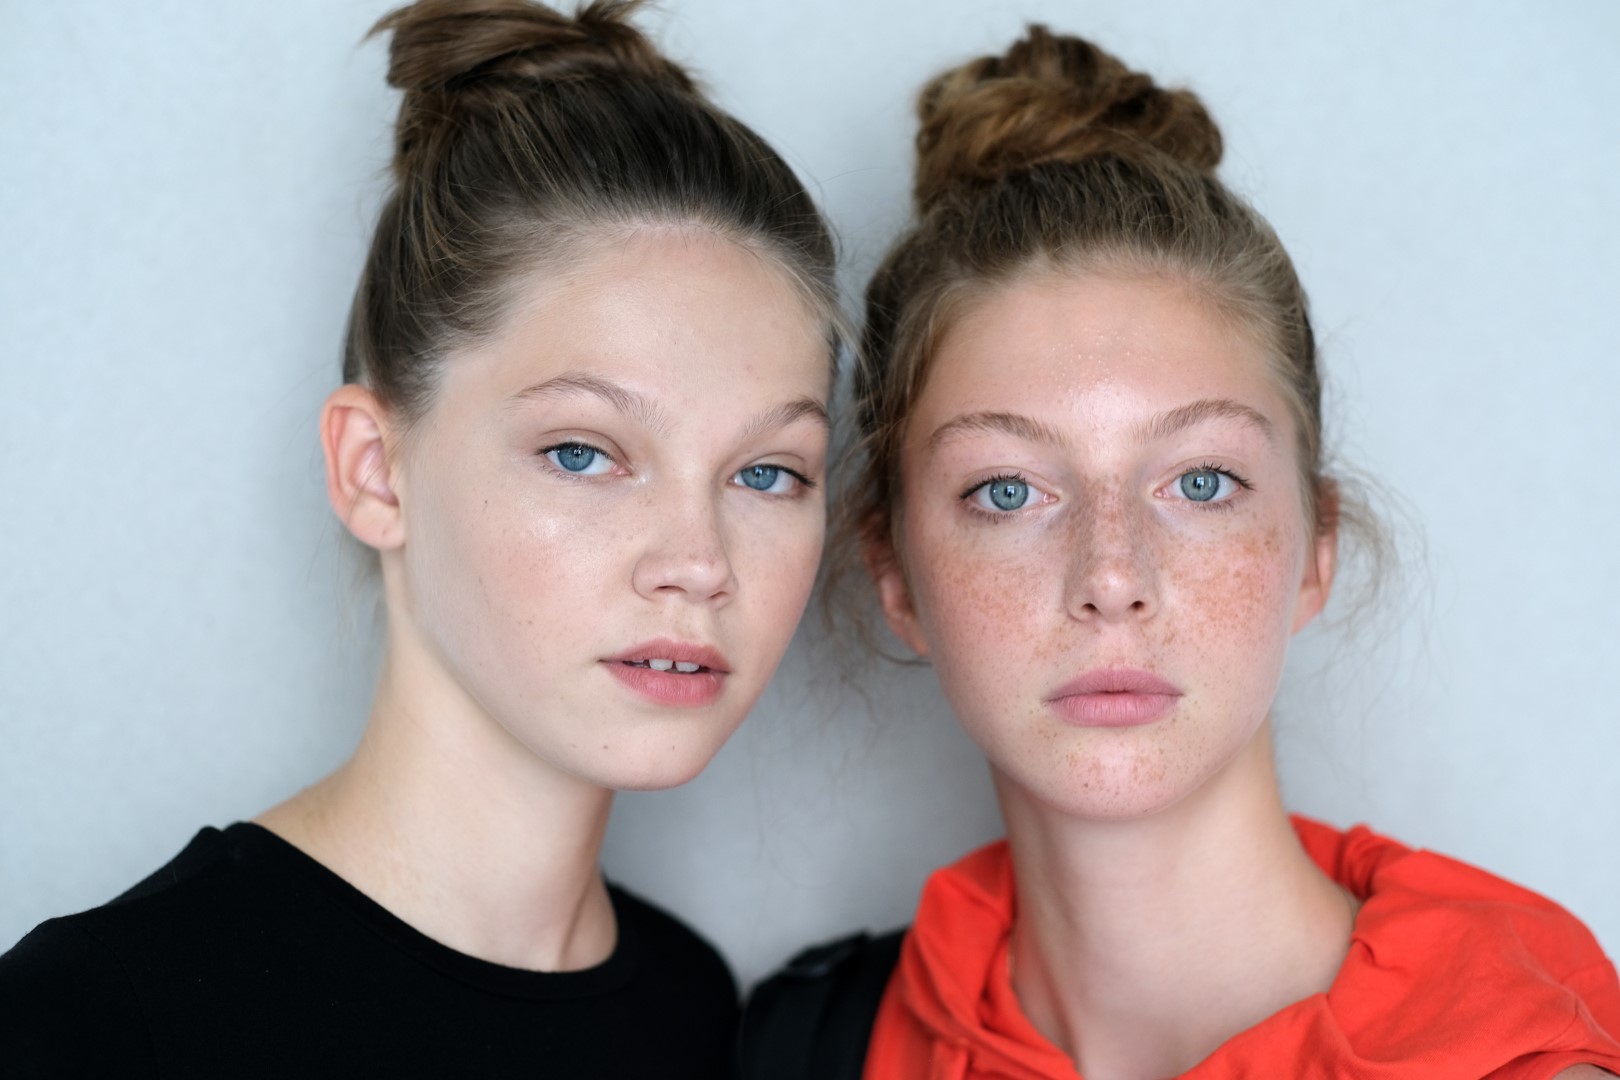 ISTANBUL, TURKEY - AUGUST 27: In this image released on October 14, Models pose backstage ahead of the Mehtap Elaidi show during Mercedes-Benz Istanbul Fashion Week at Galataport Postane on August 27, 2020 in Istanbul, Turkey. (Photo by Ferda Demir/Getty Images for IHKIB)